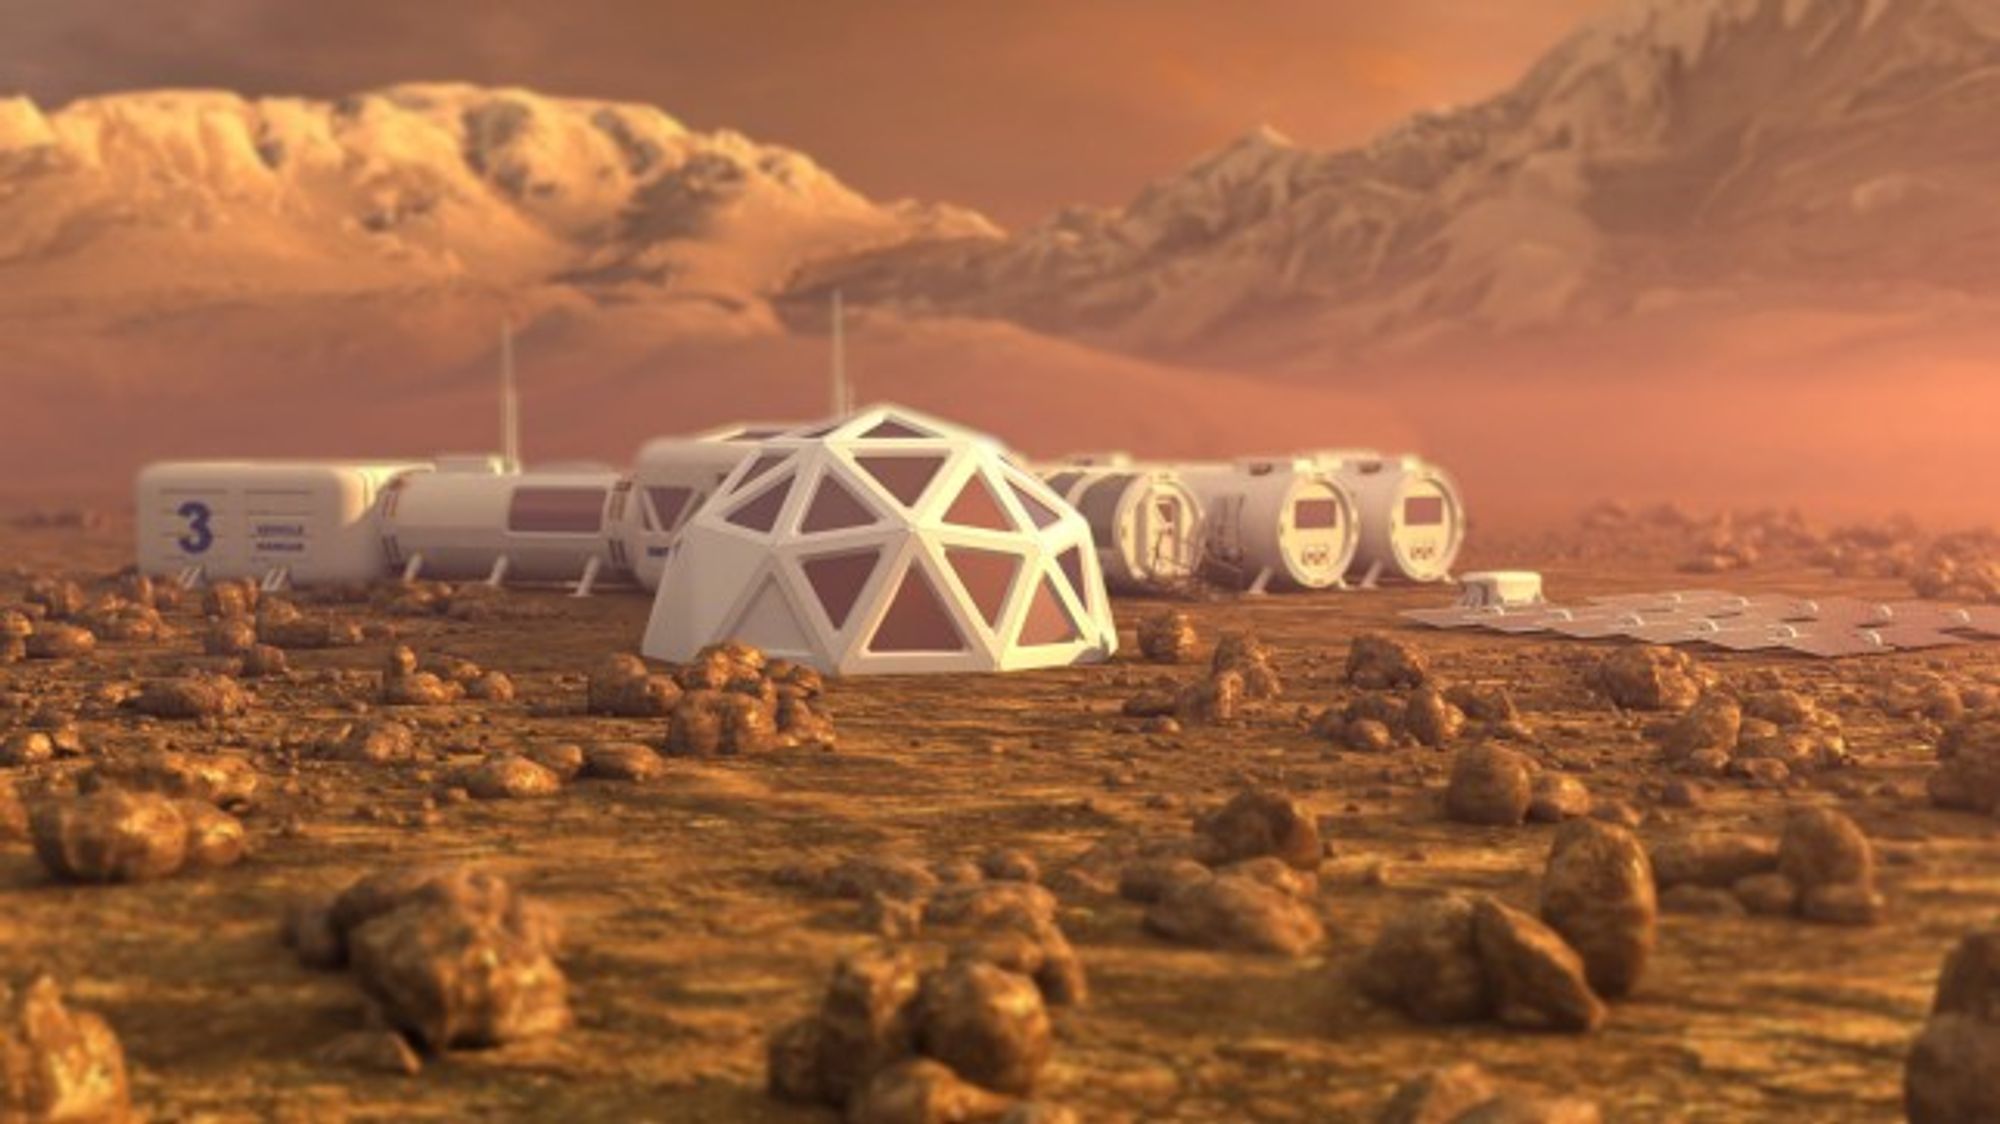 Space bricks made from astronaut urine could lead to Martian colony | Metro News